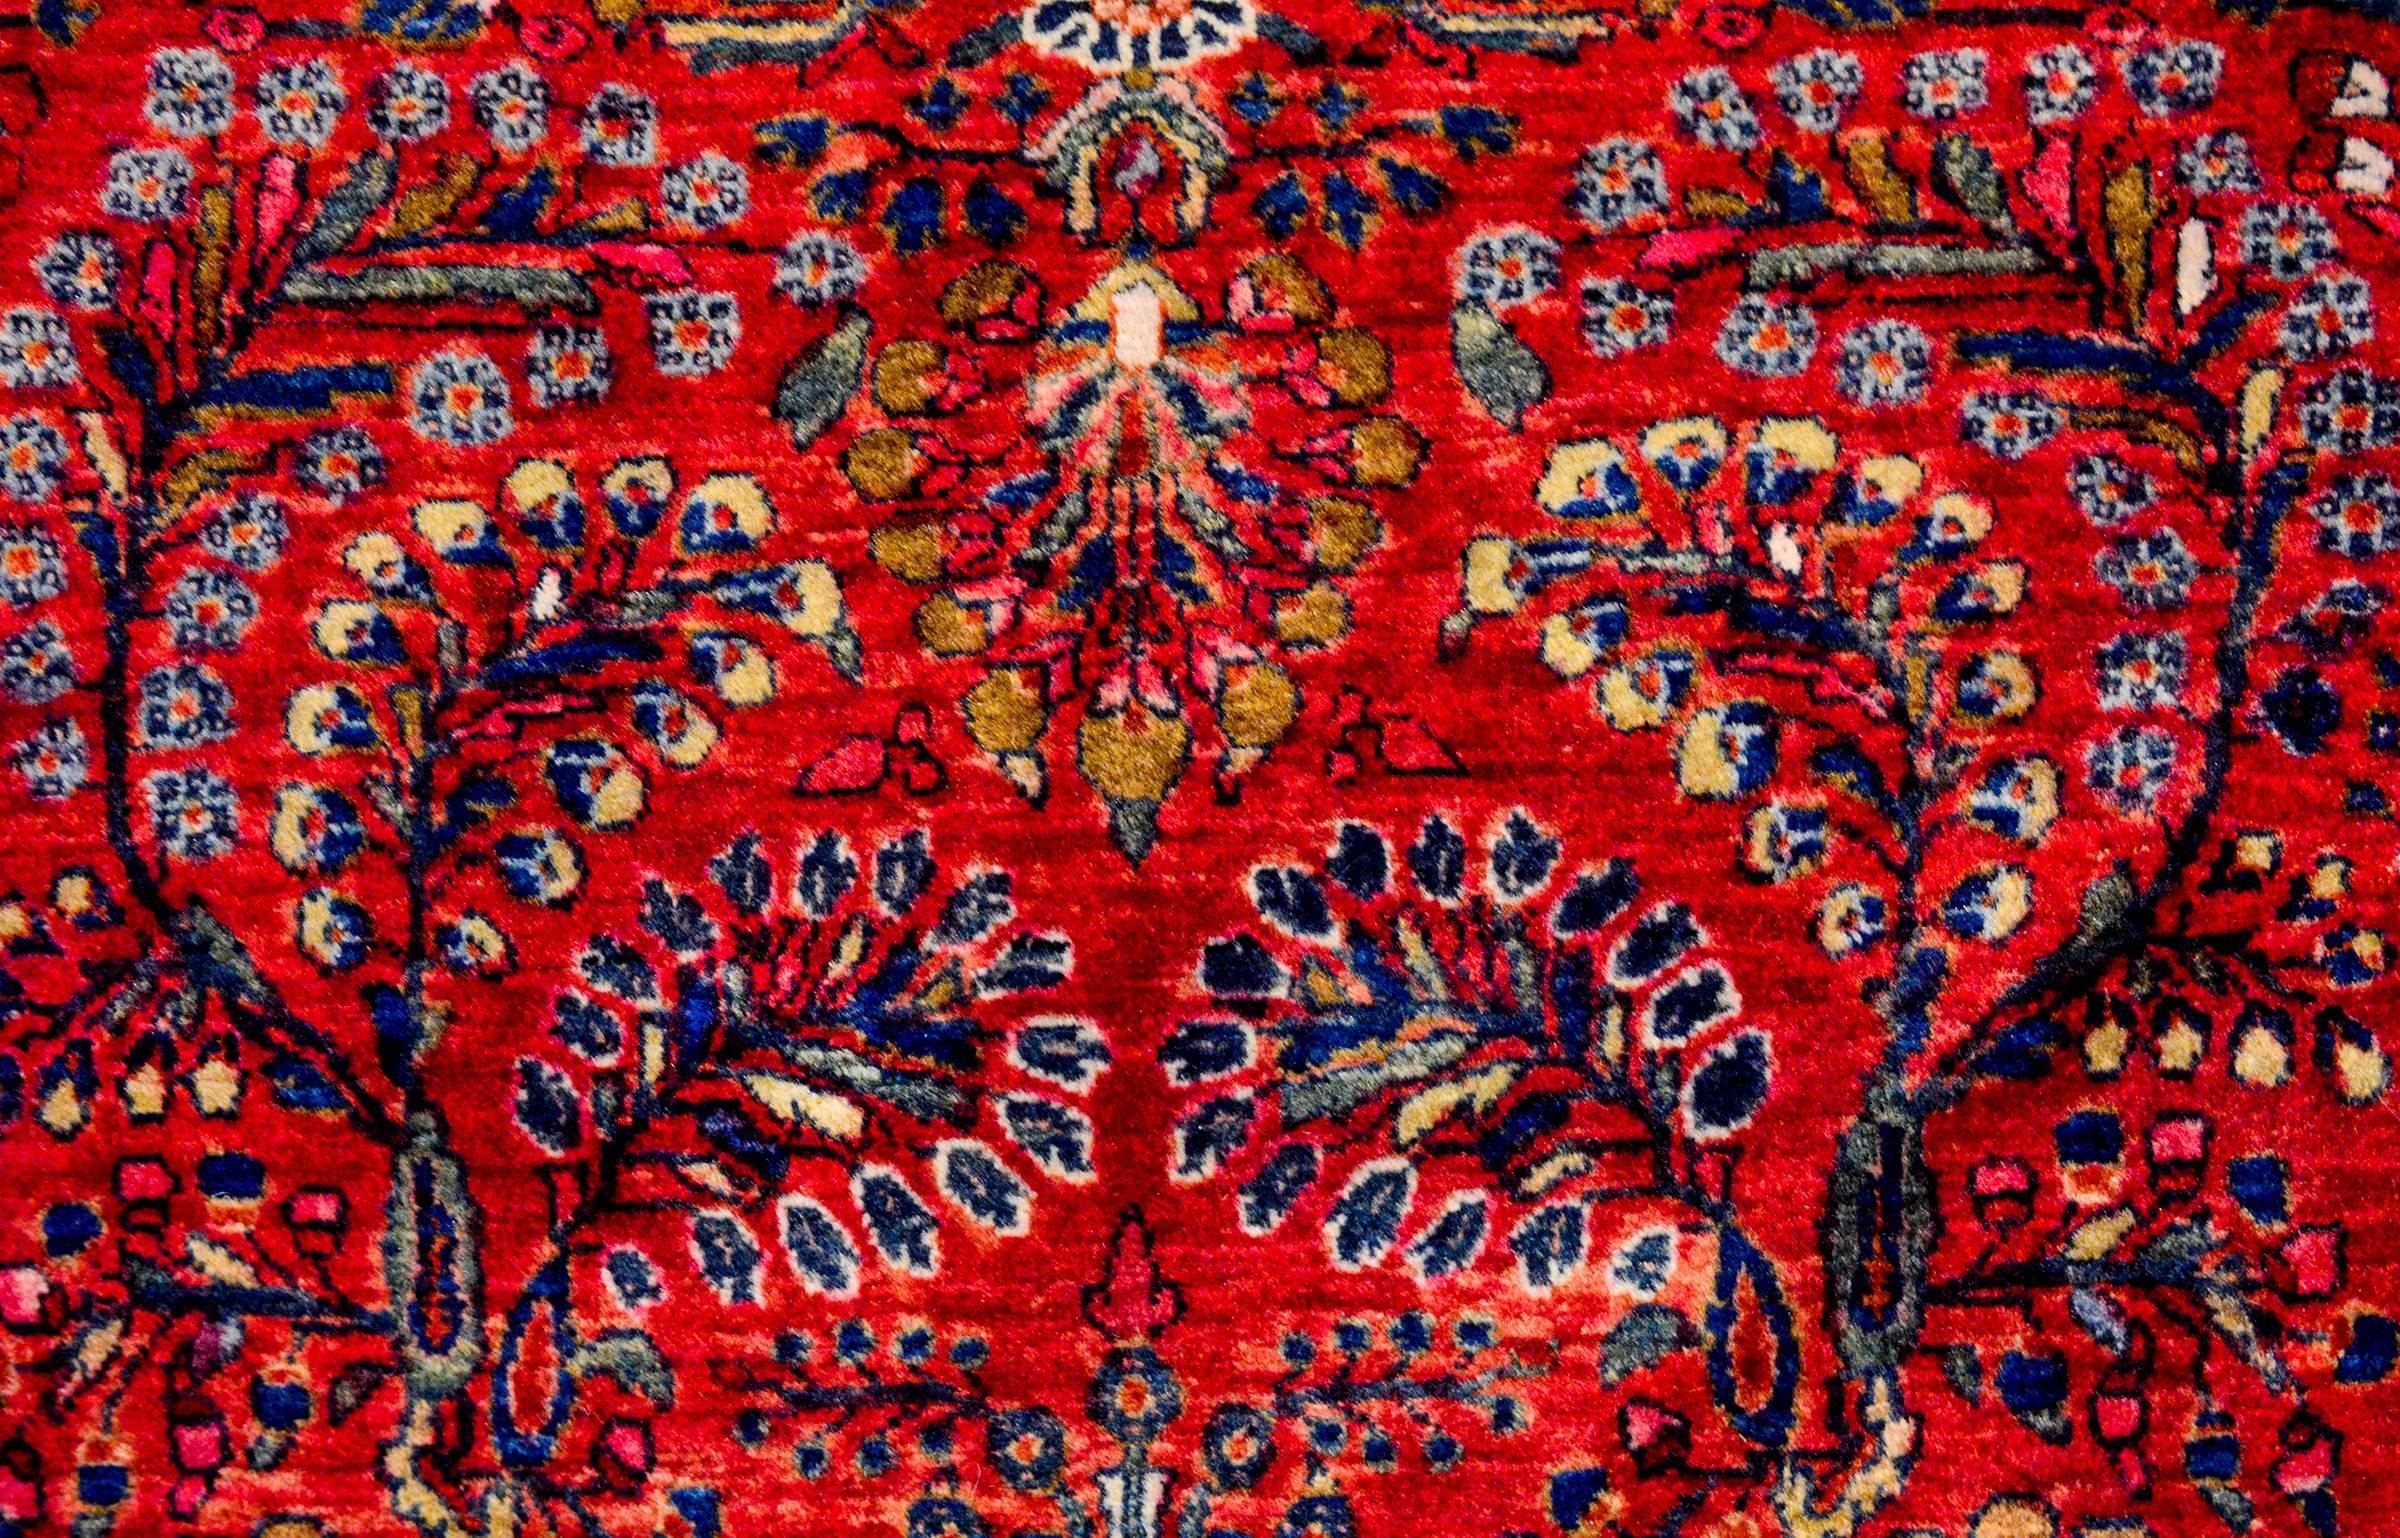 A beautiful early 20th century Persian Sarouk rug with a traditional all-over mirrored floral and vine tree-of-life pattern woven in light and dark indigo and cream colored wool, on a rich cranberry background. The border is complex with a wide